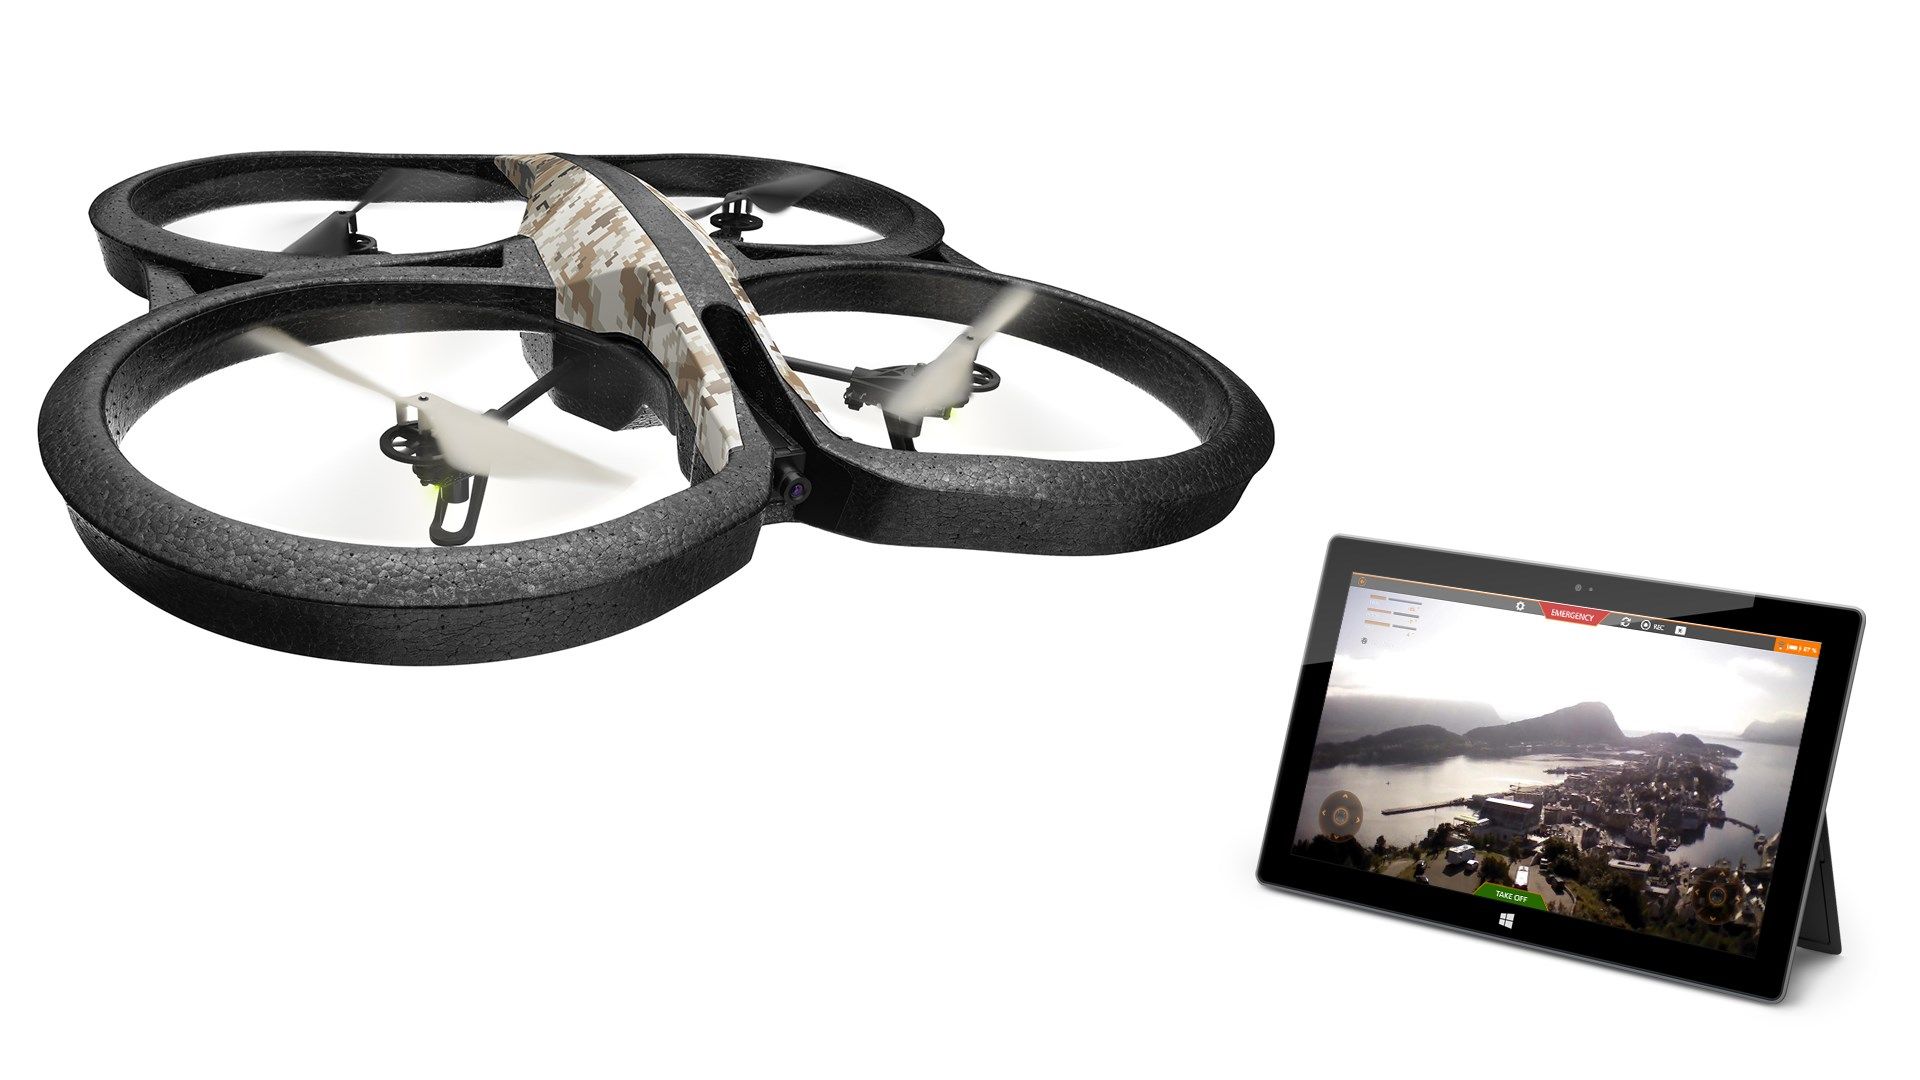 The application and the AR.Drone 2.0